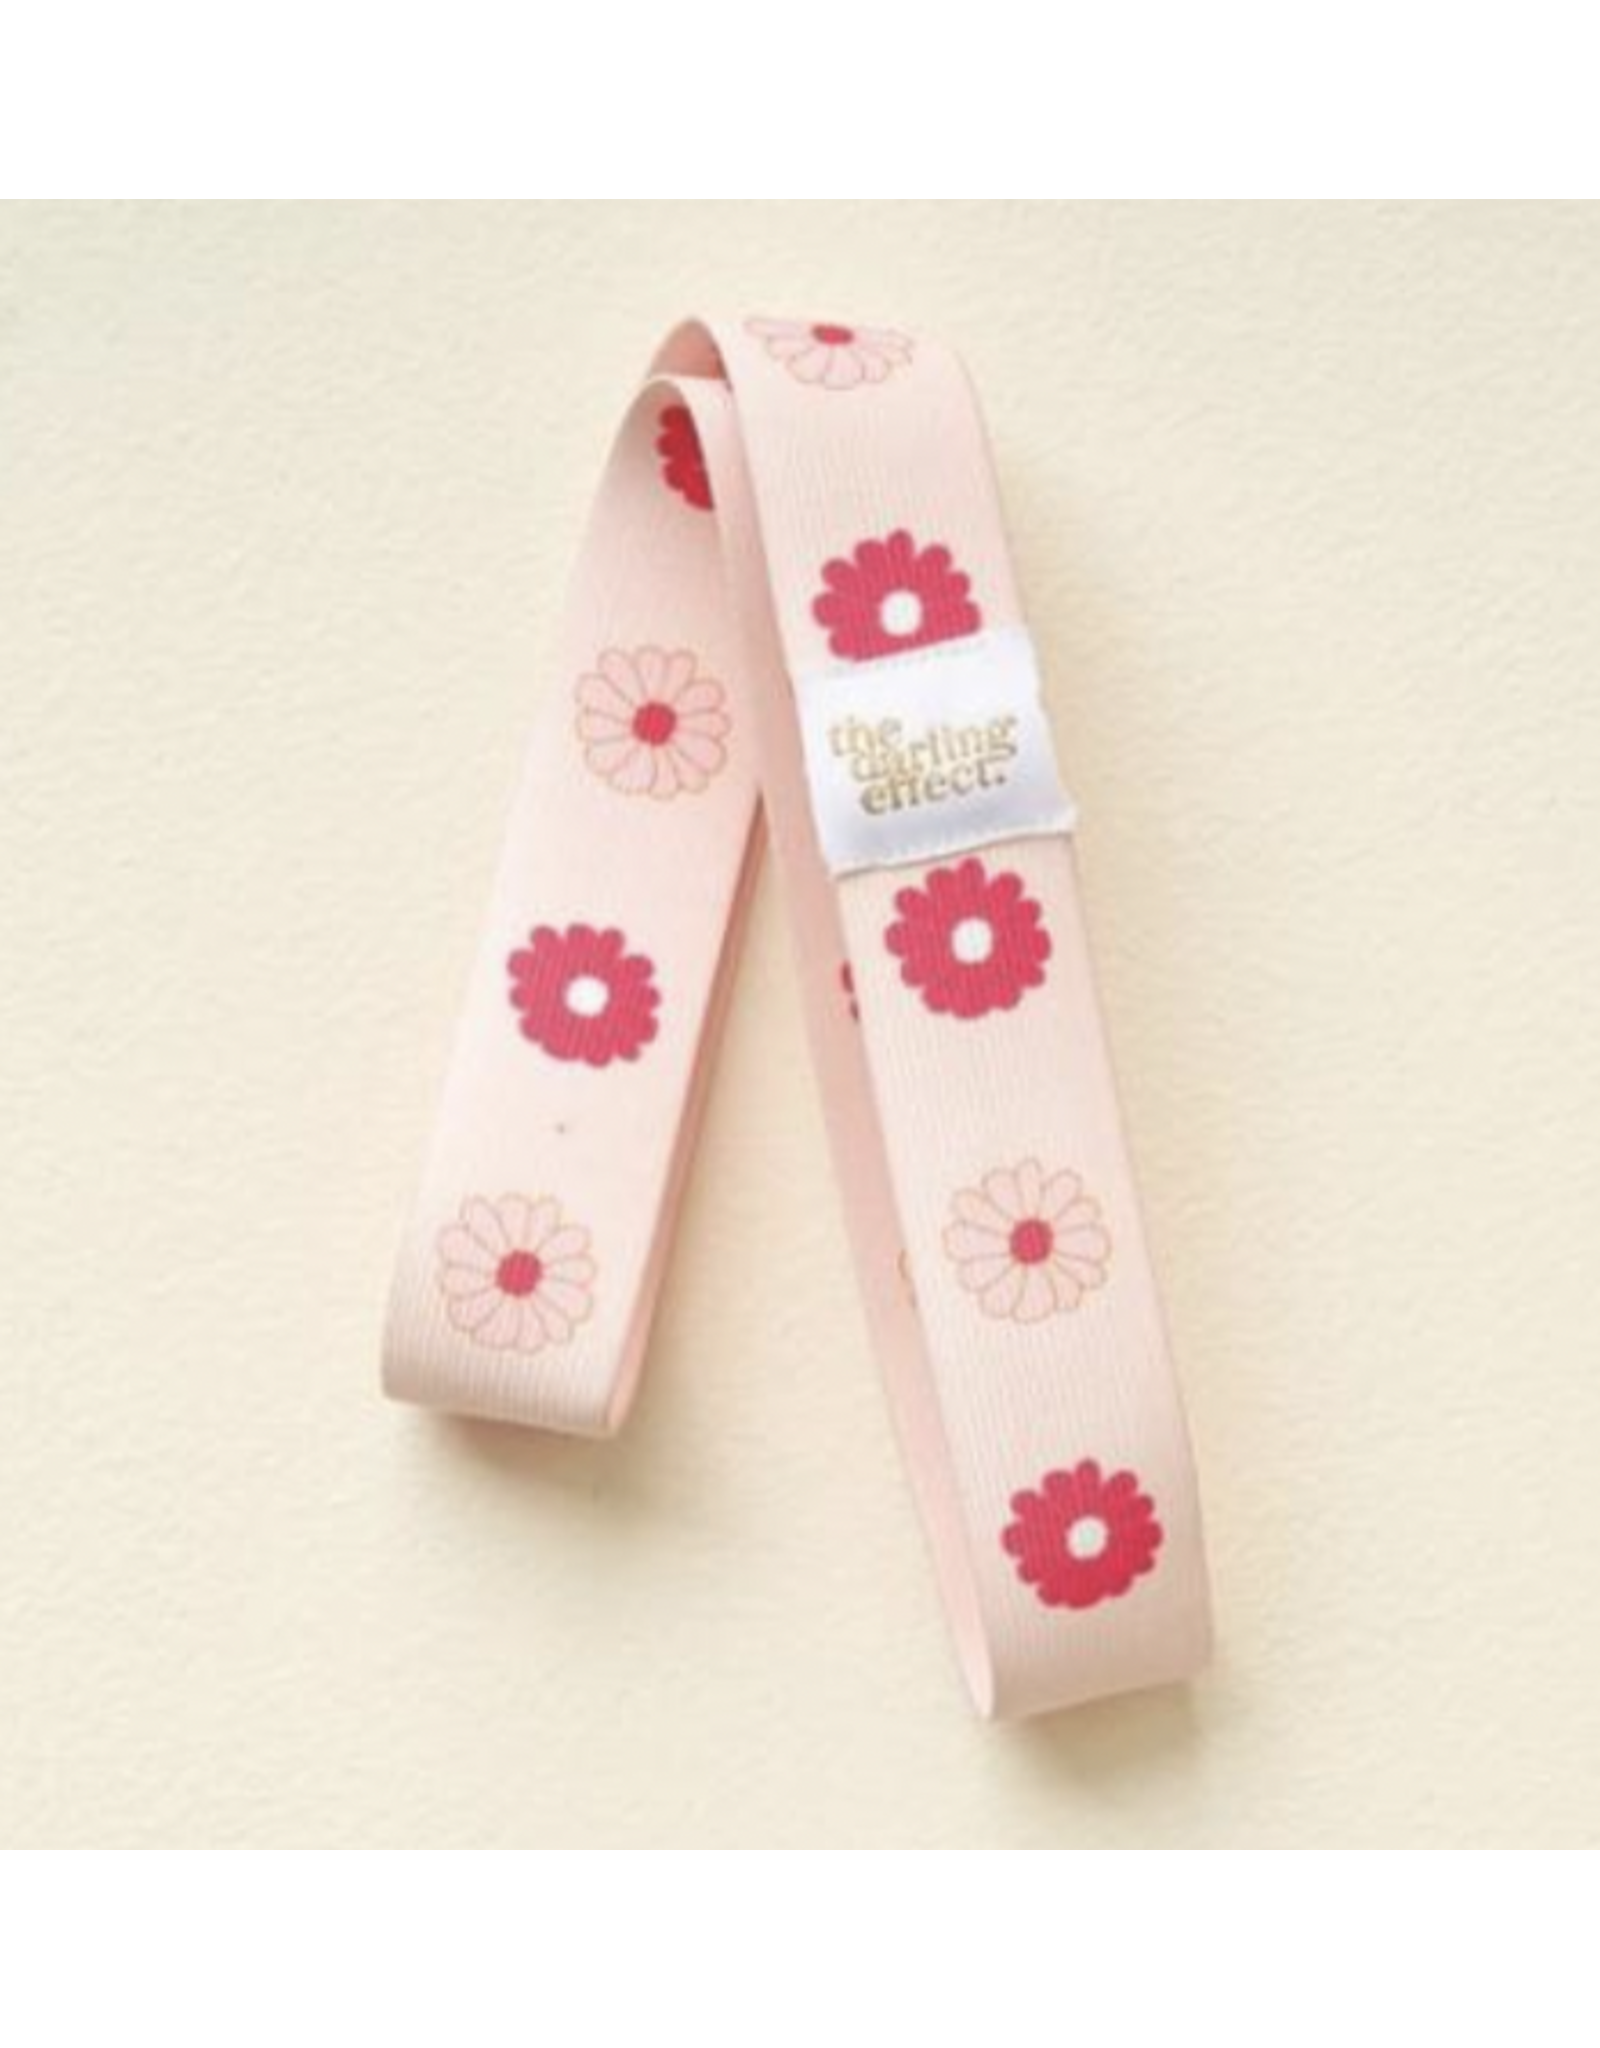 Stay put towel bands-Darling Daisy Hot Pink